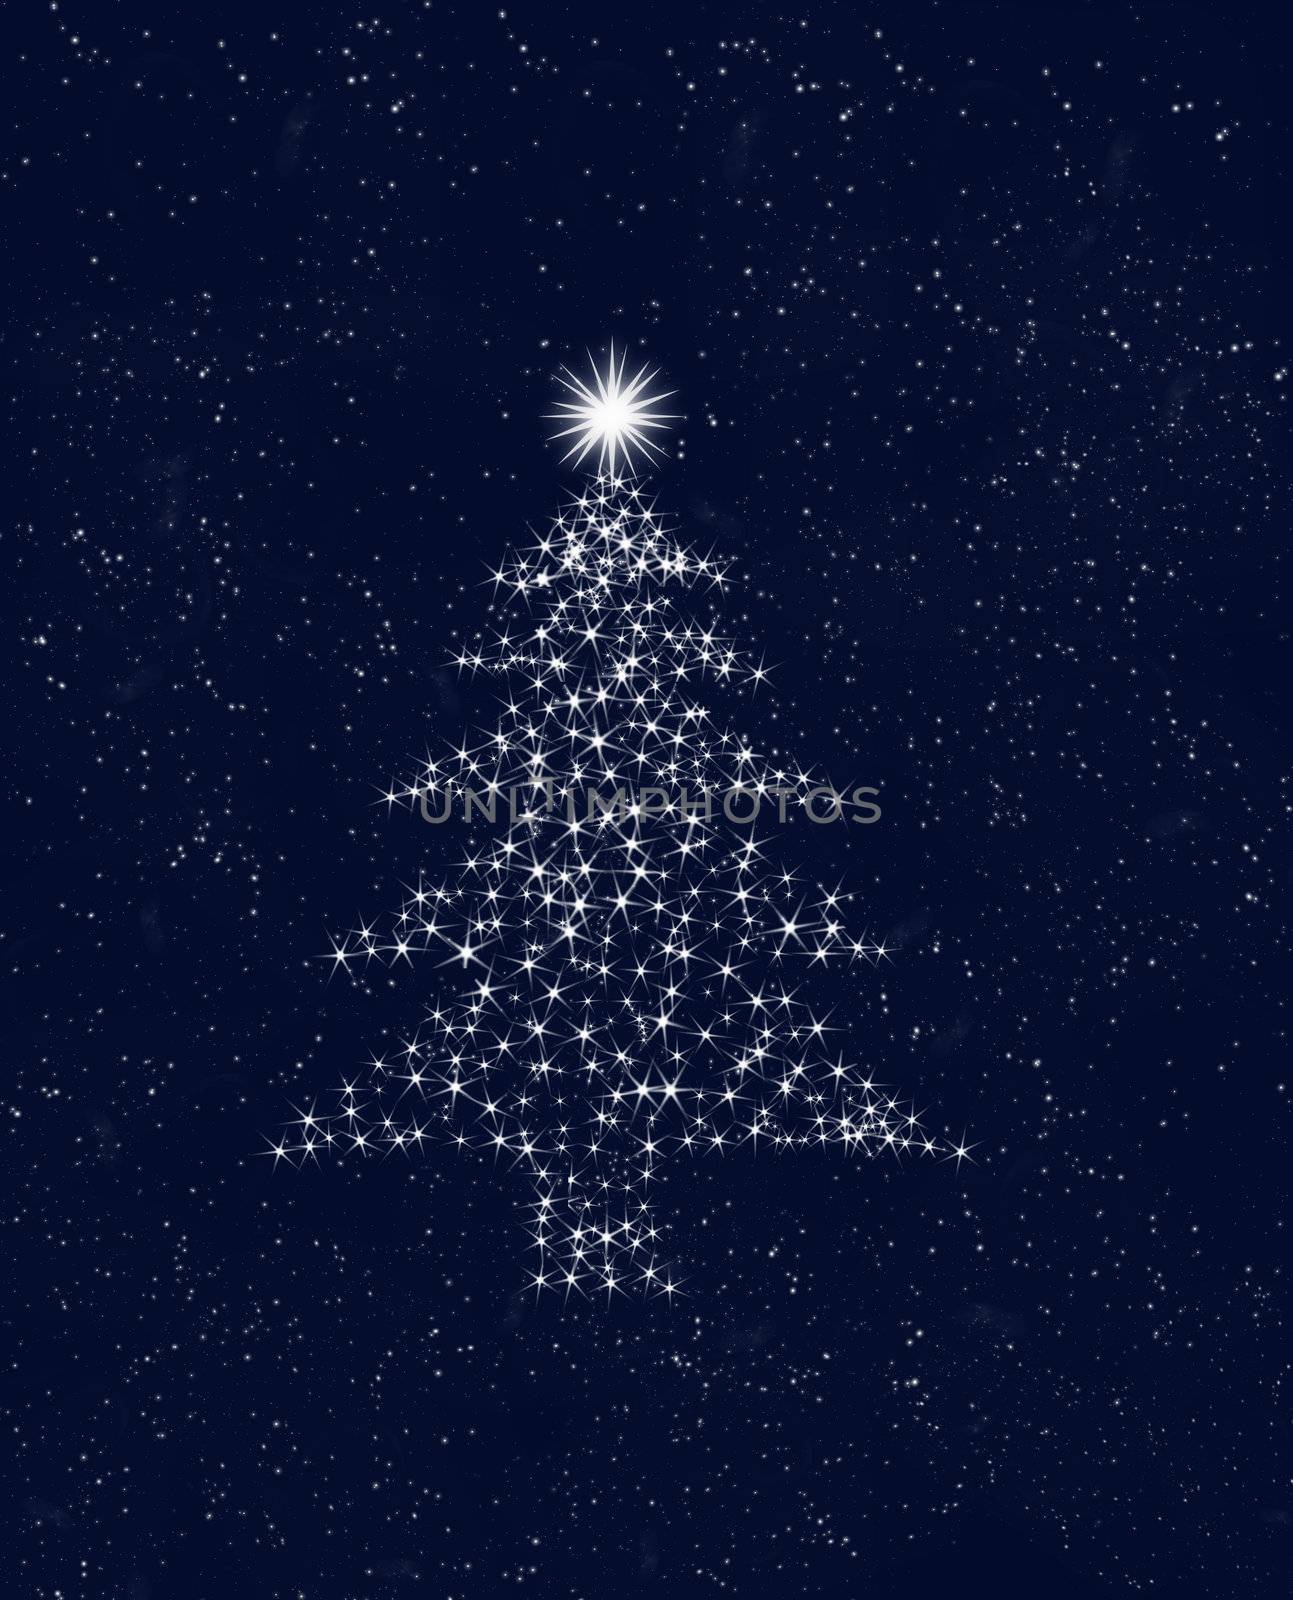 christmas tree made up of stars in the night sky